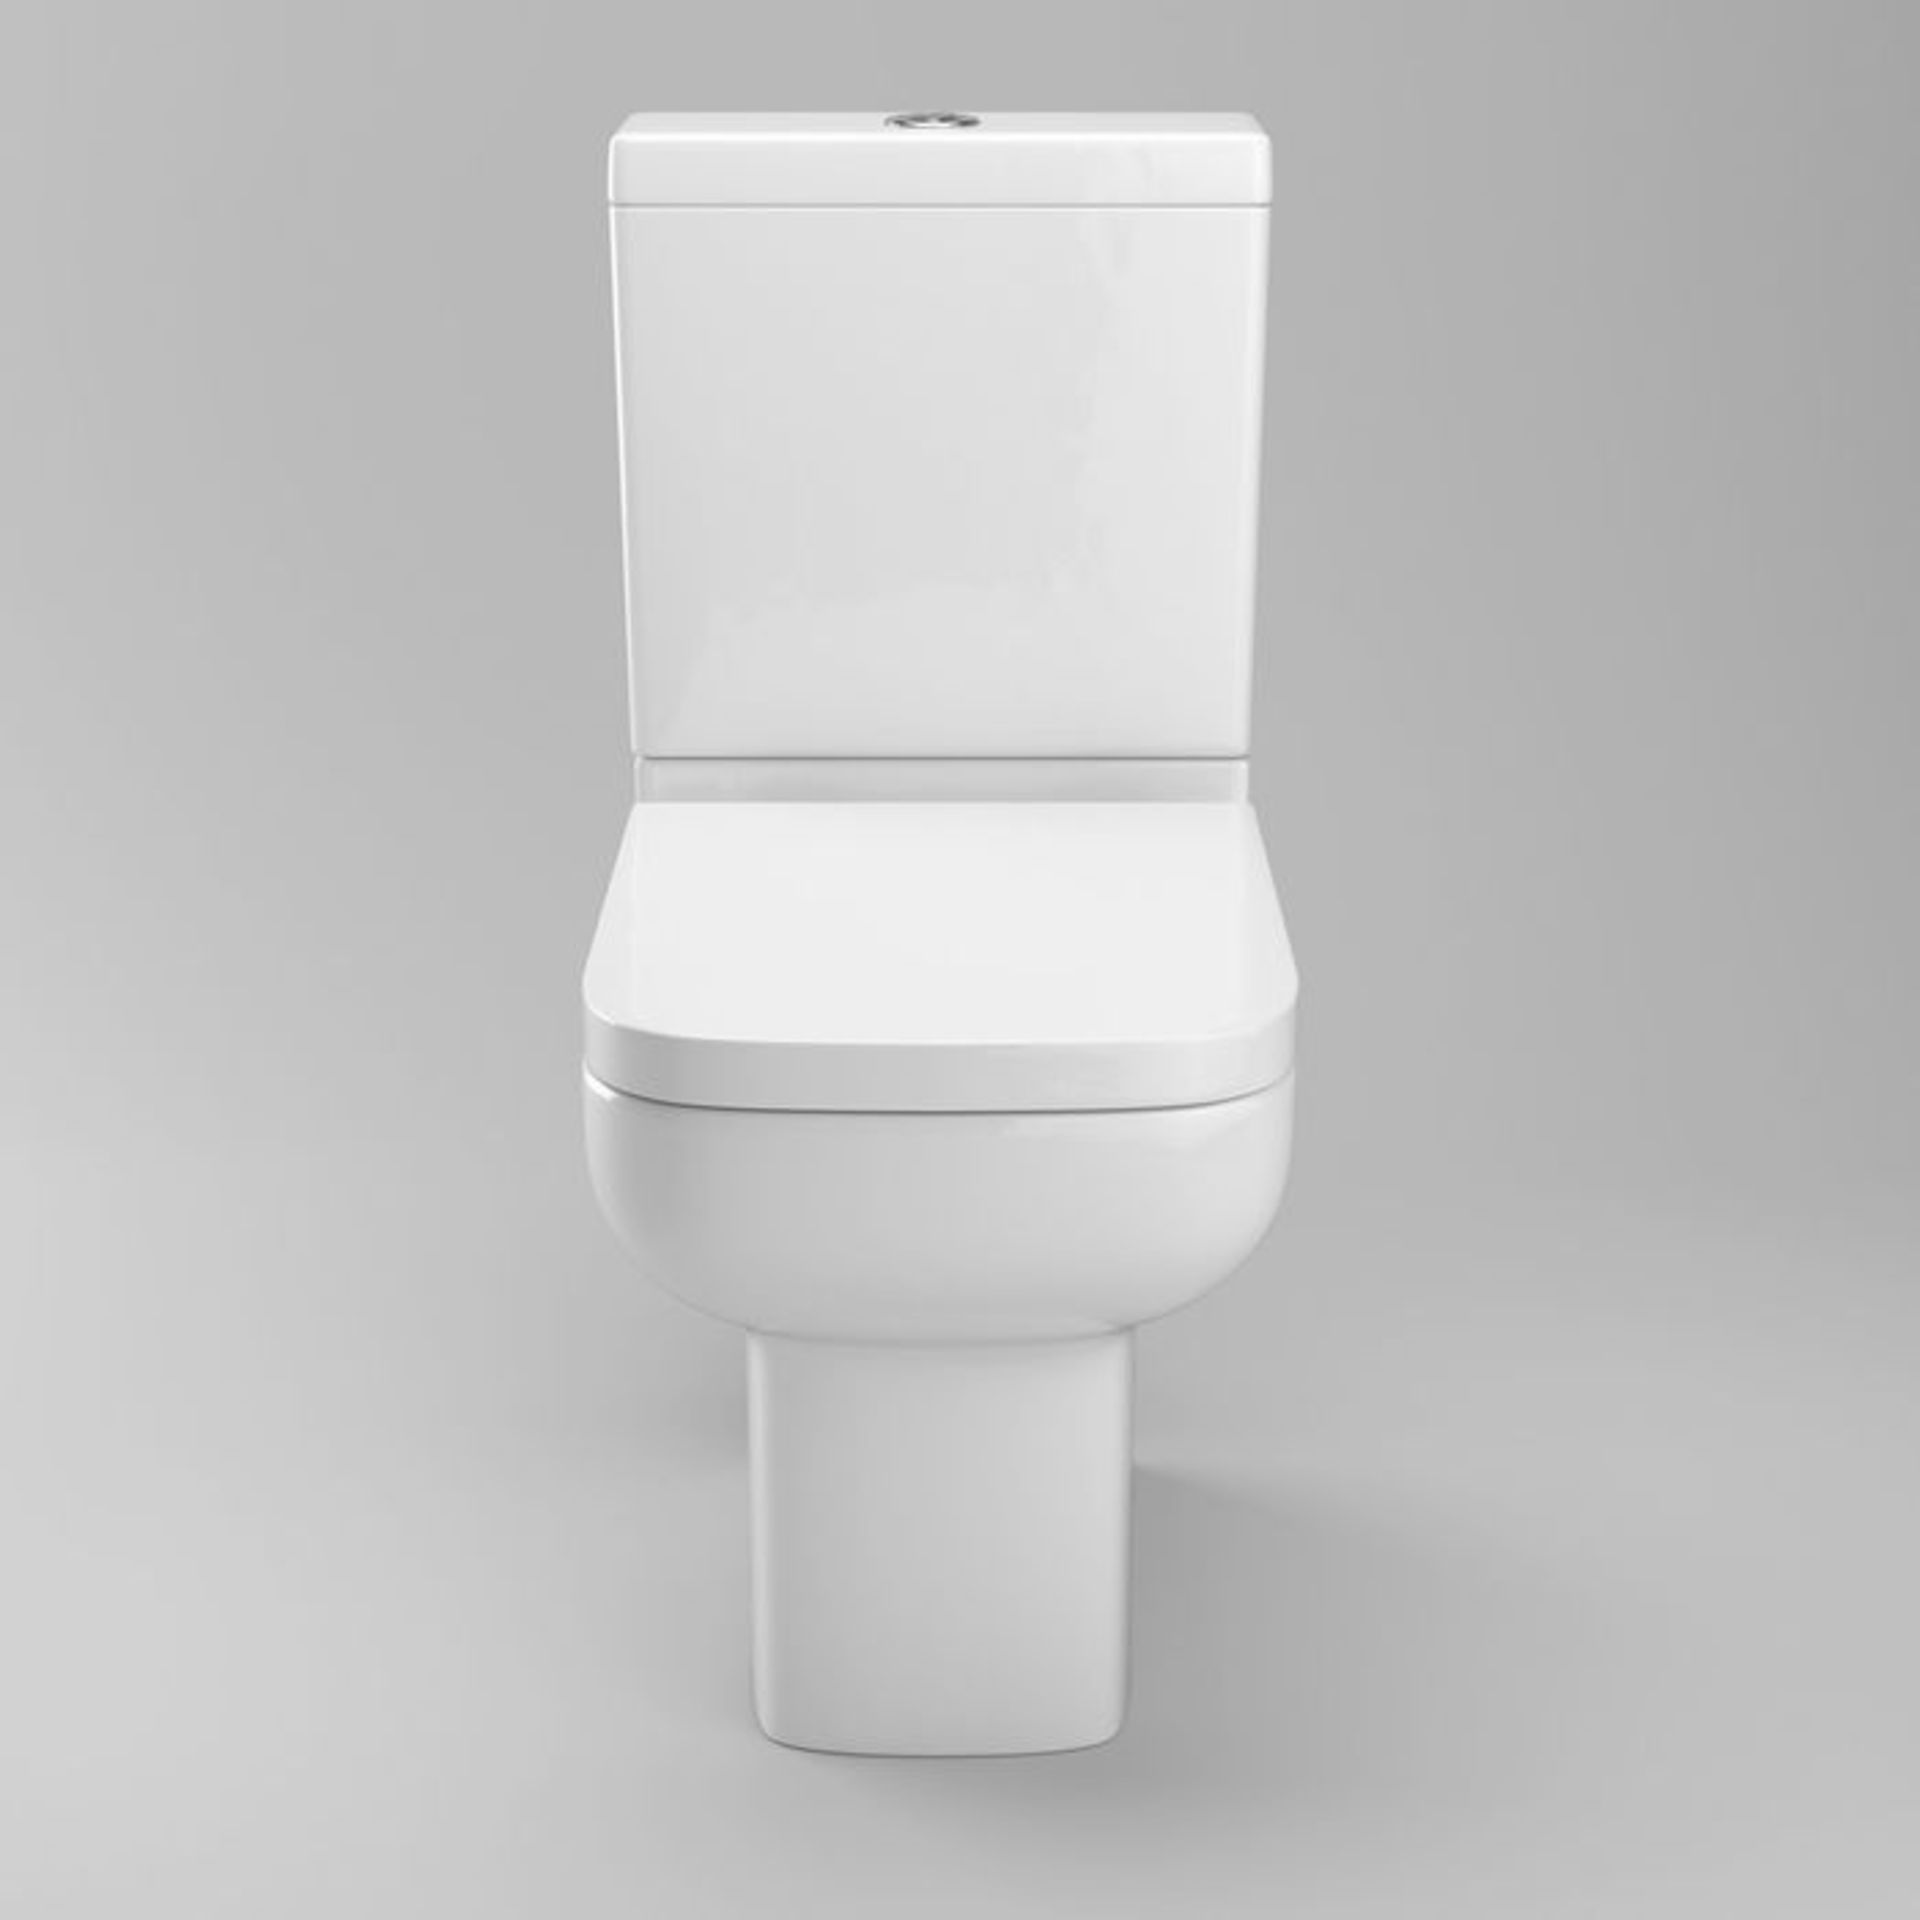 (PA64) Short Projection Close Coupled Toilet & Cistern inc Soft Close Seat. We love this because the - Image 4 of 4